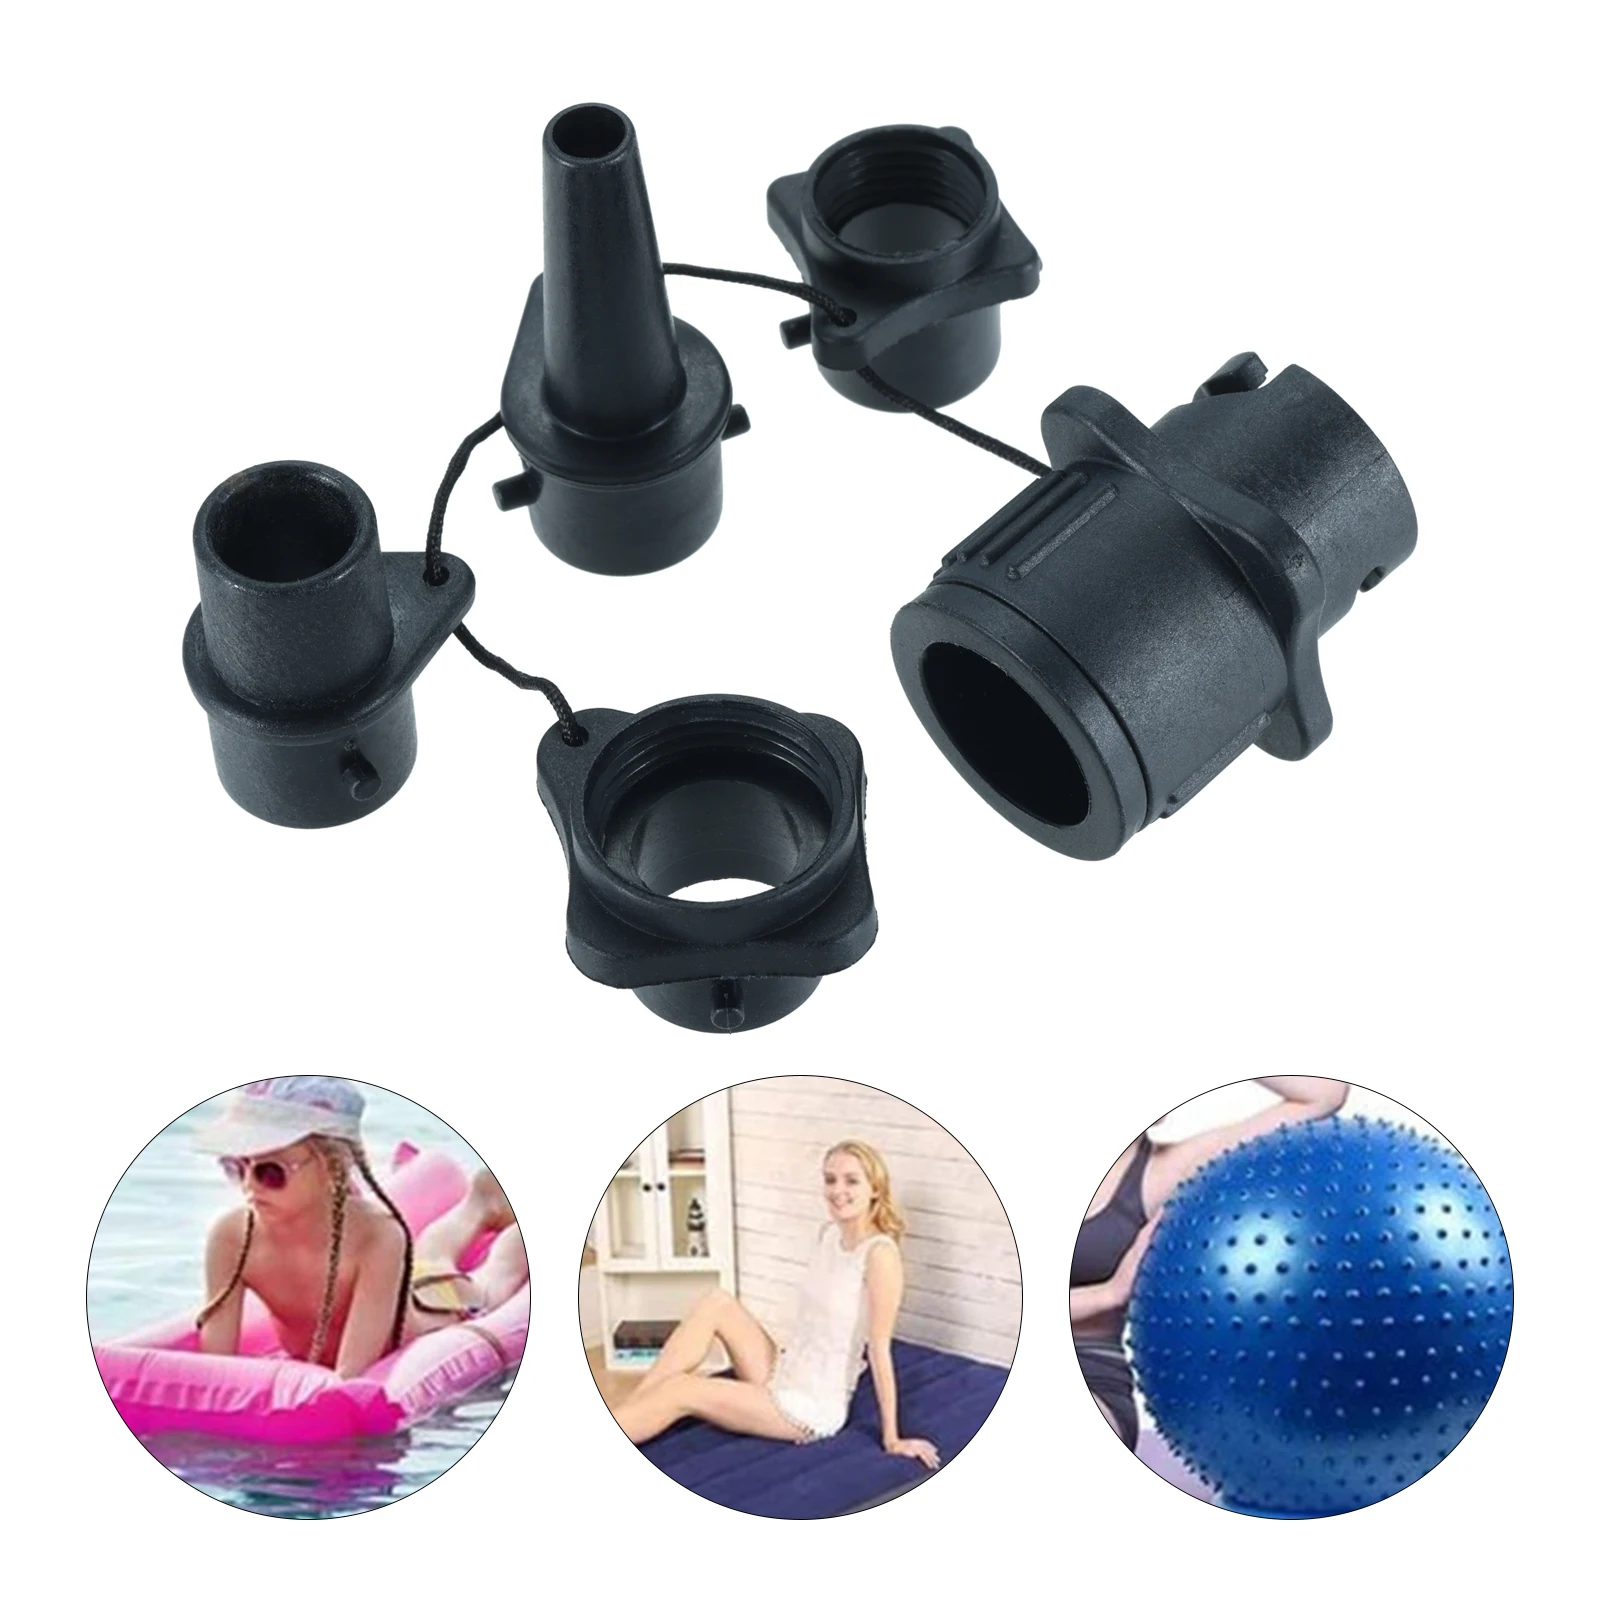 1 Set Air Valve Nozzle Adapter Kit Black Plastic Multi-Function Hose Connector Surf Paddle Board Canoe Inflatable Boat Accessory 6 5mm brass tire inflatable nozzle for bike motorcycle car tire inflatable pump valve connector tyre valve air compressor